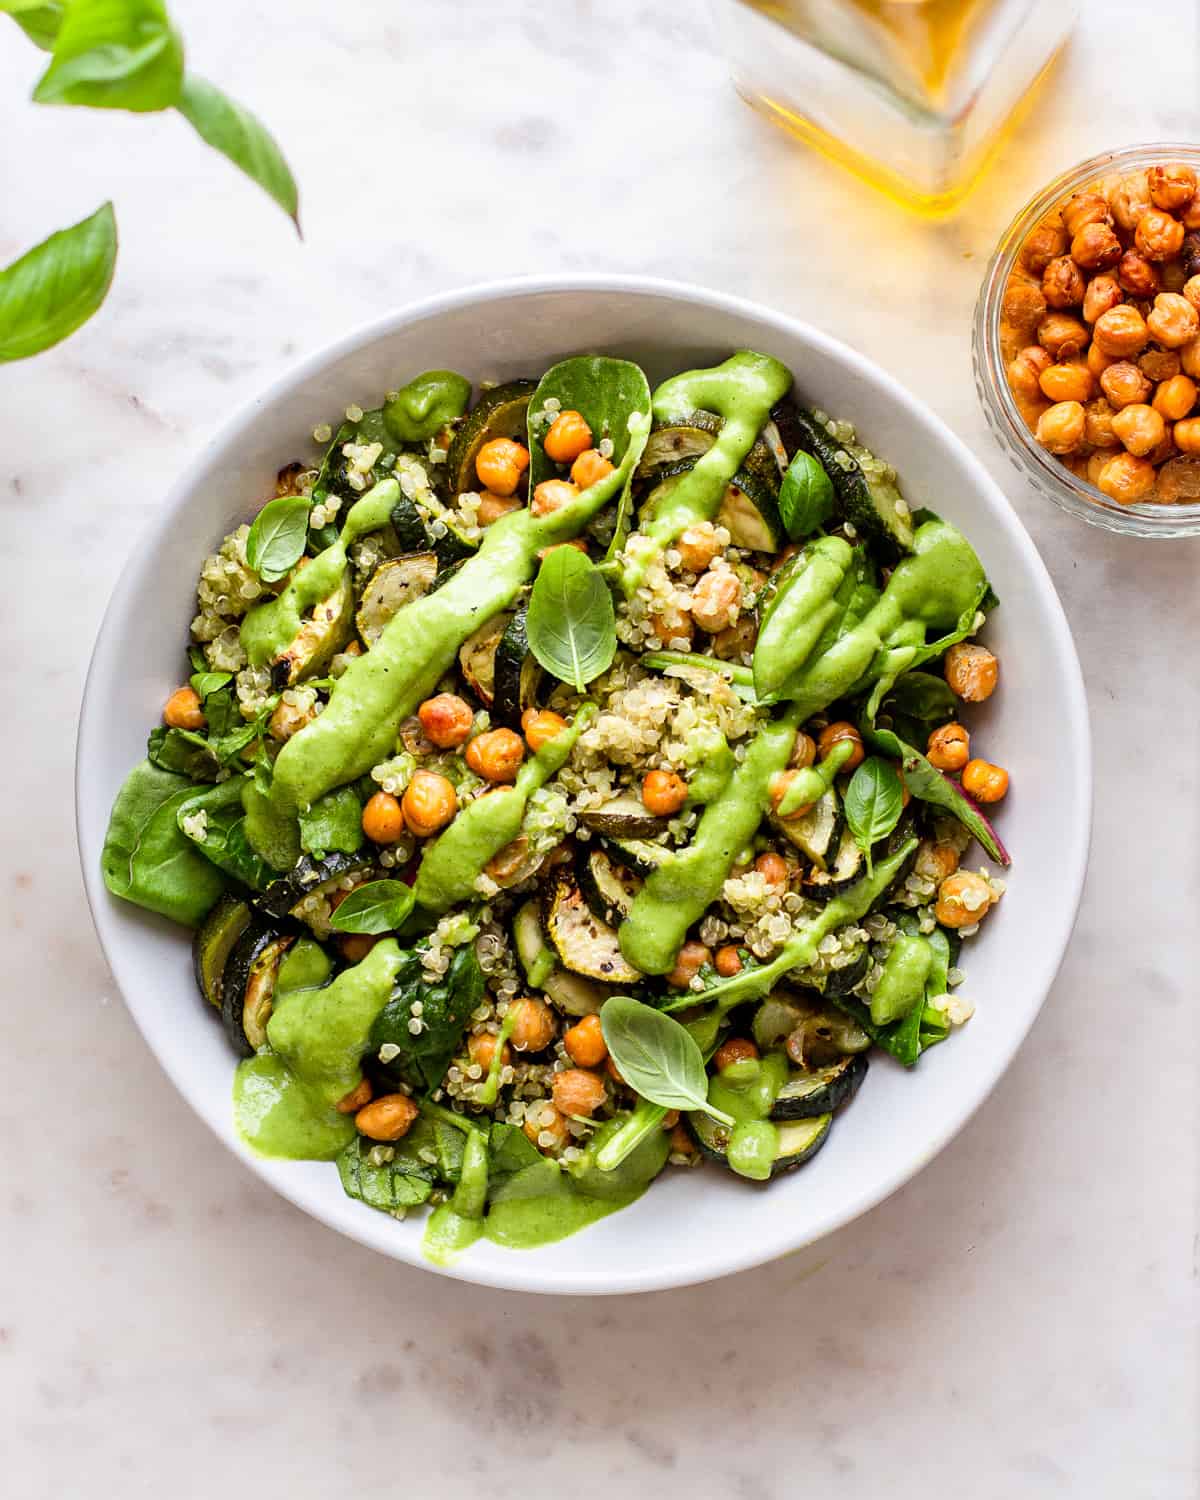 Zucchini salad with roasted chickpeas and quinoa topped with a bright green dressing.